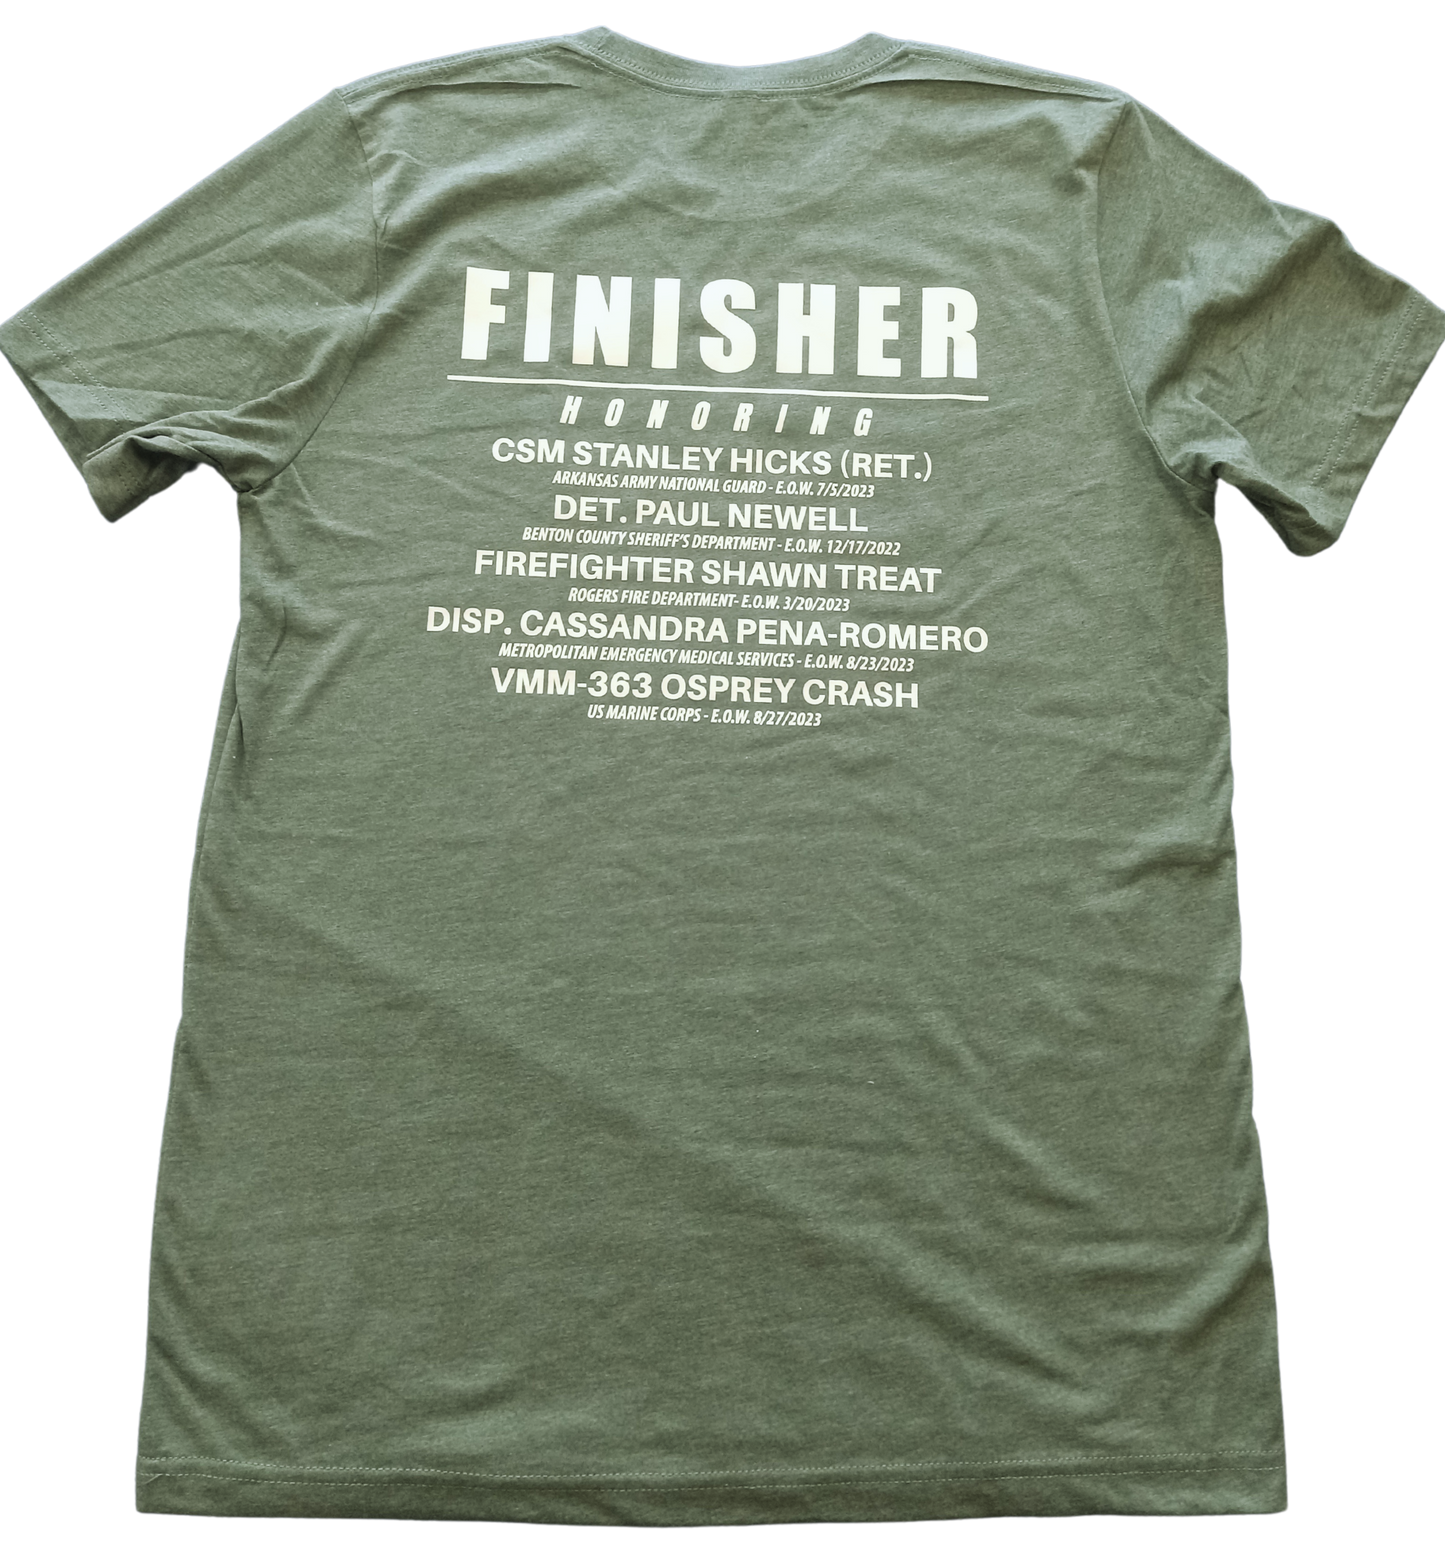 Turkey Trot for Heroes Event Shirt